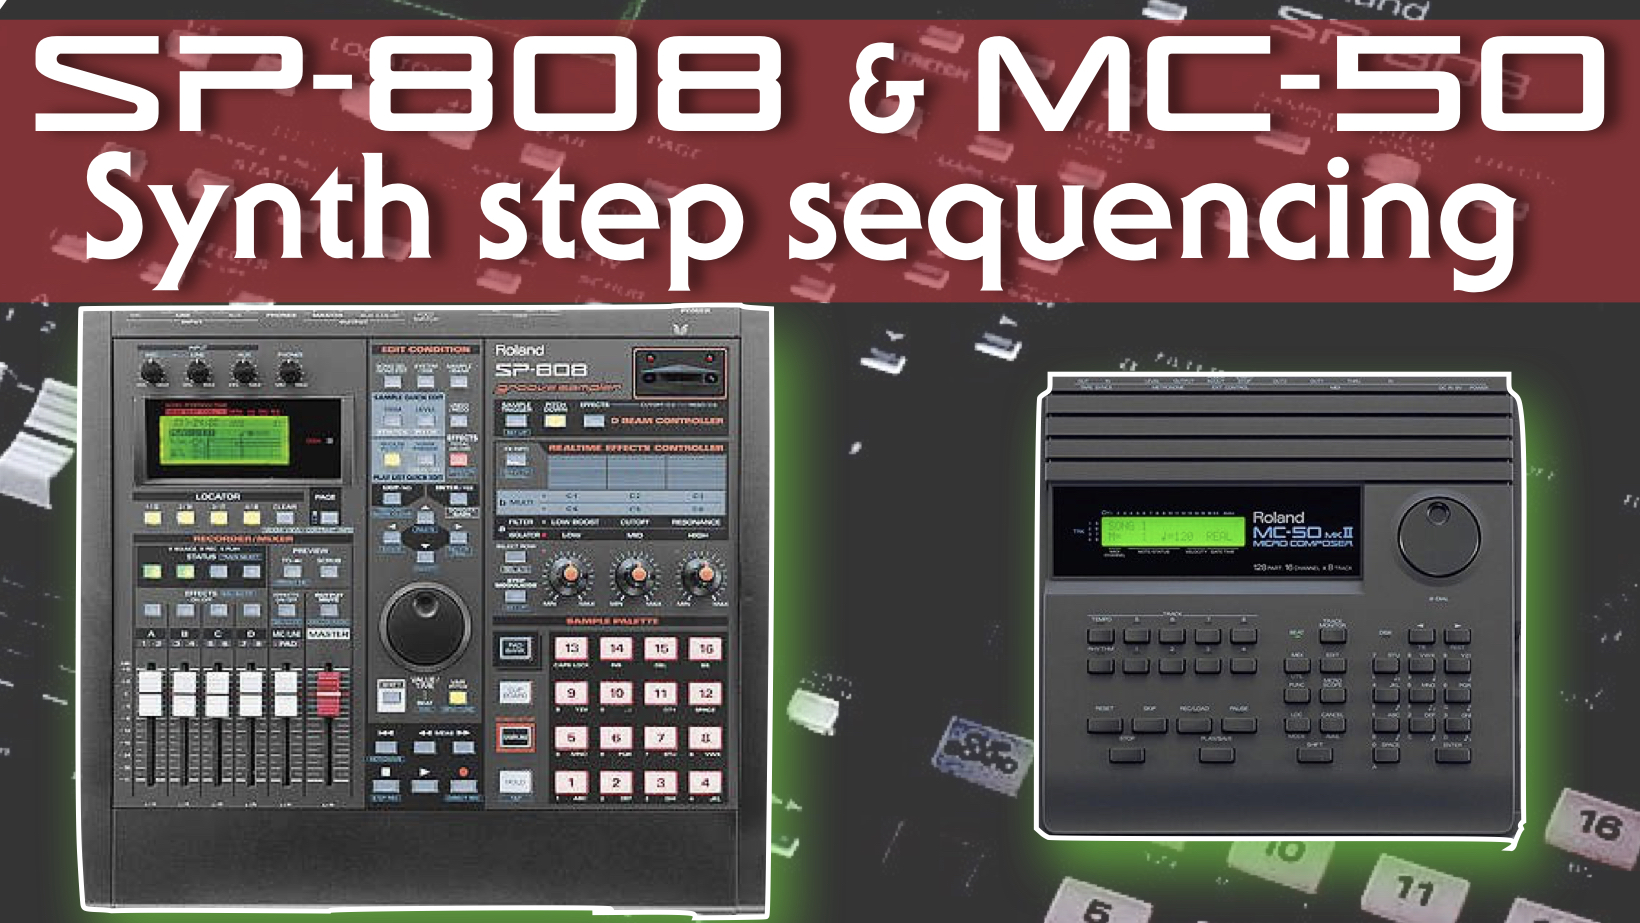 MC-50 and SP-808 step sequencing